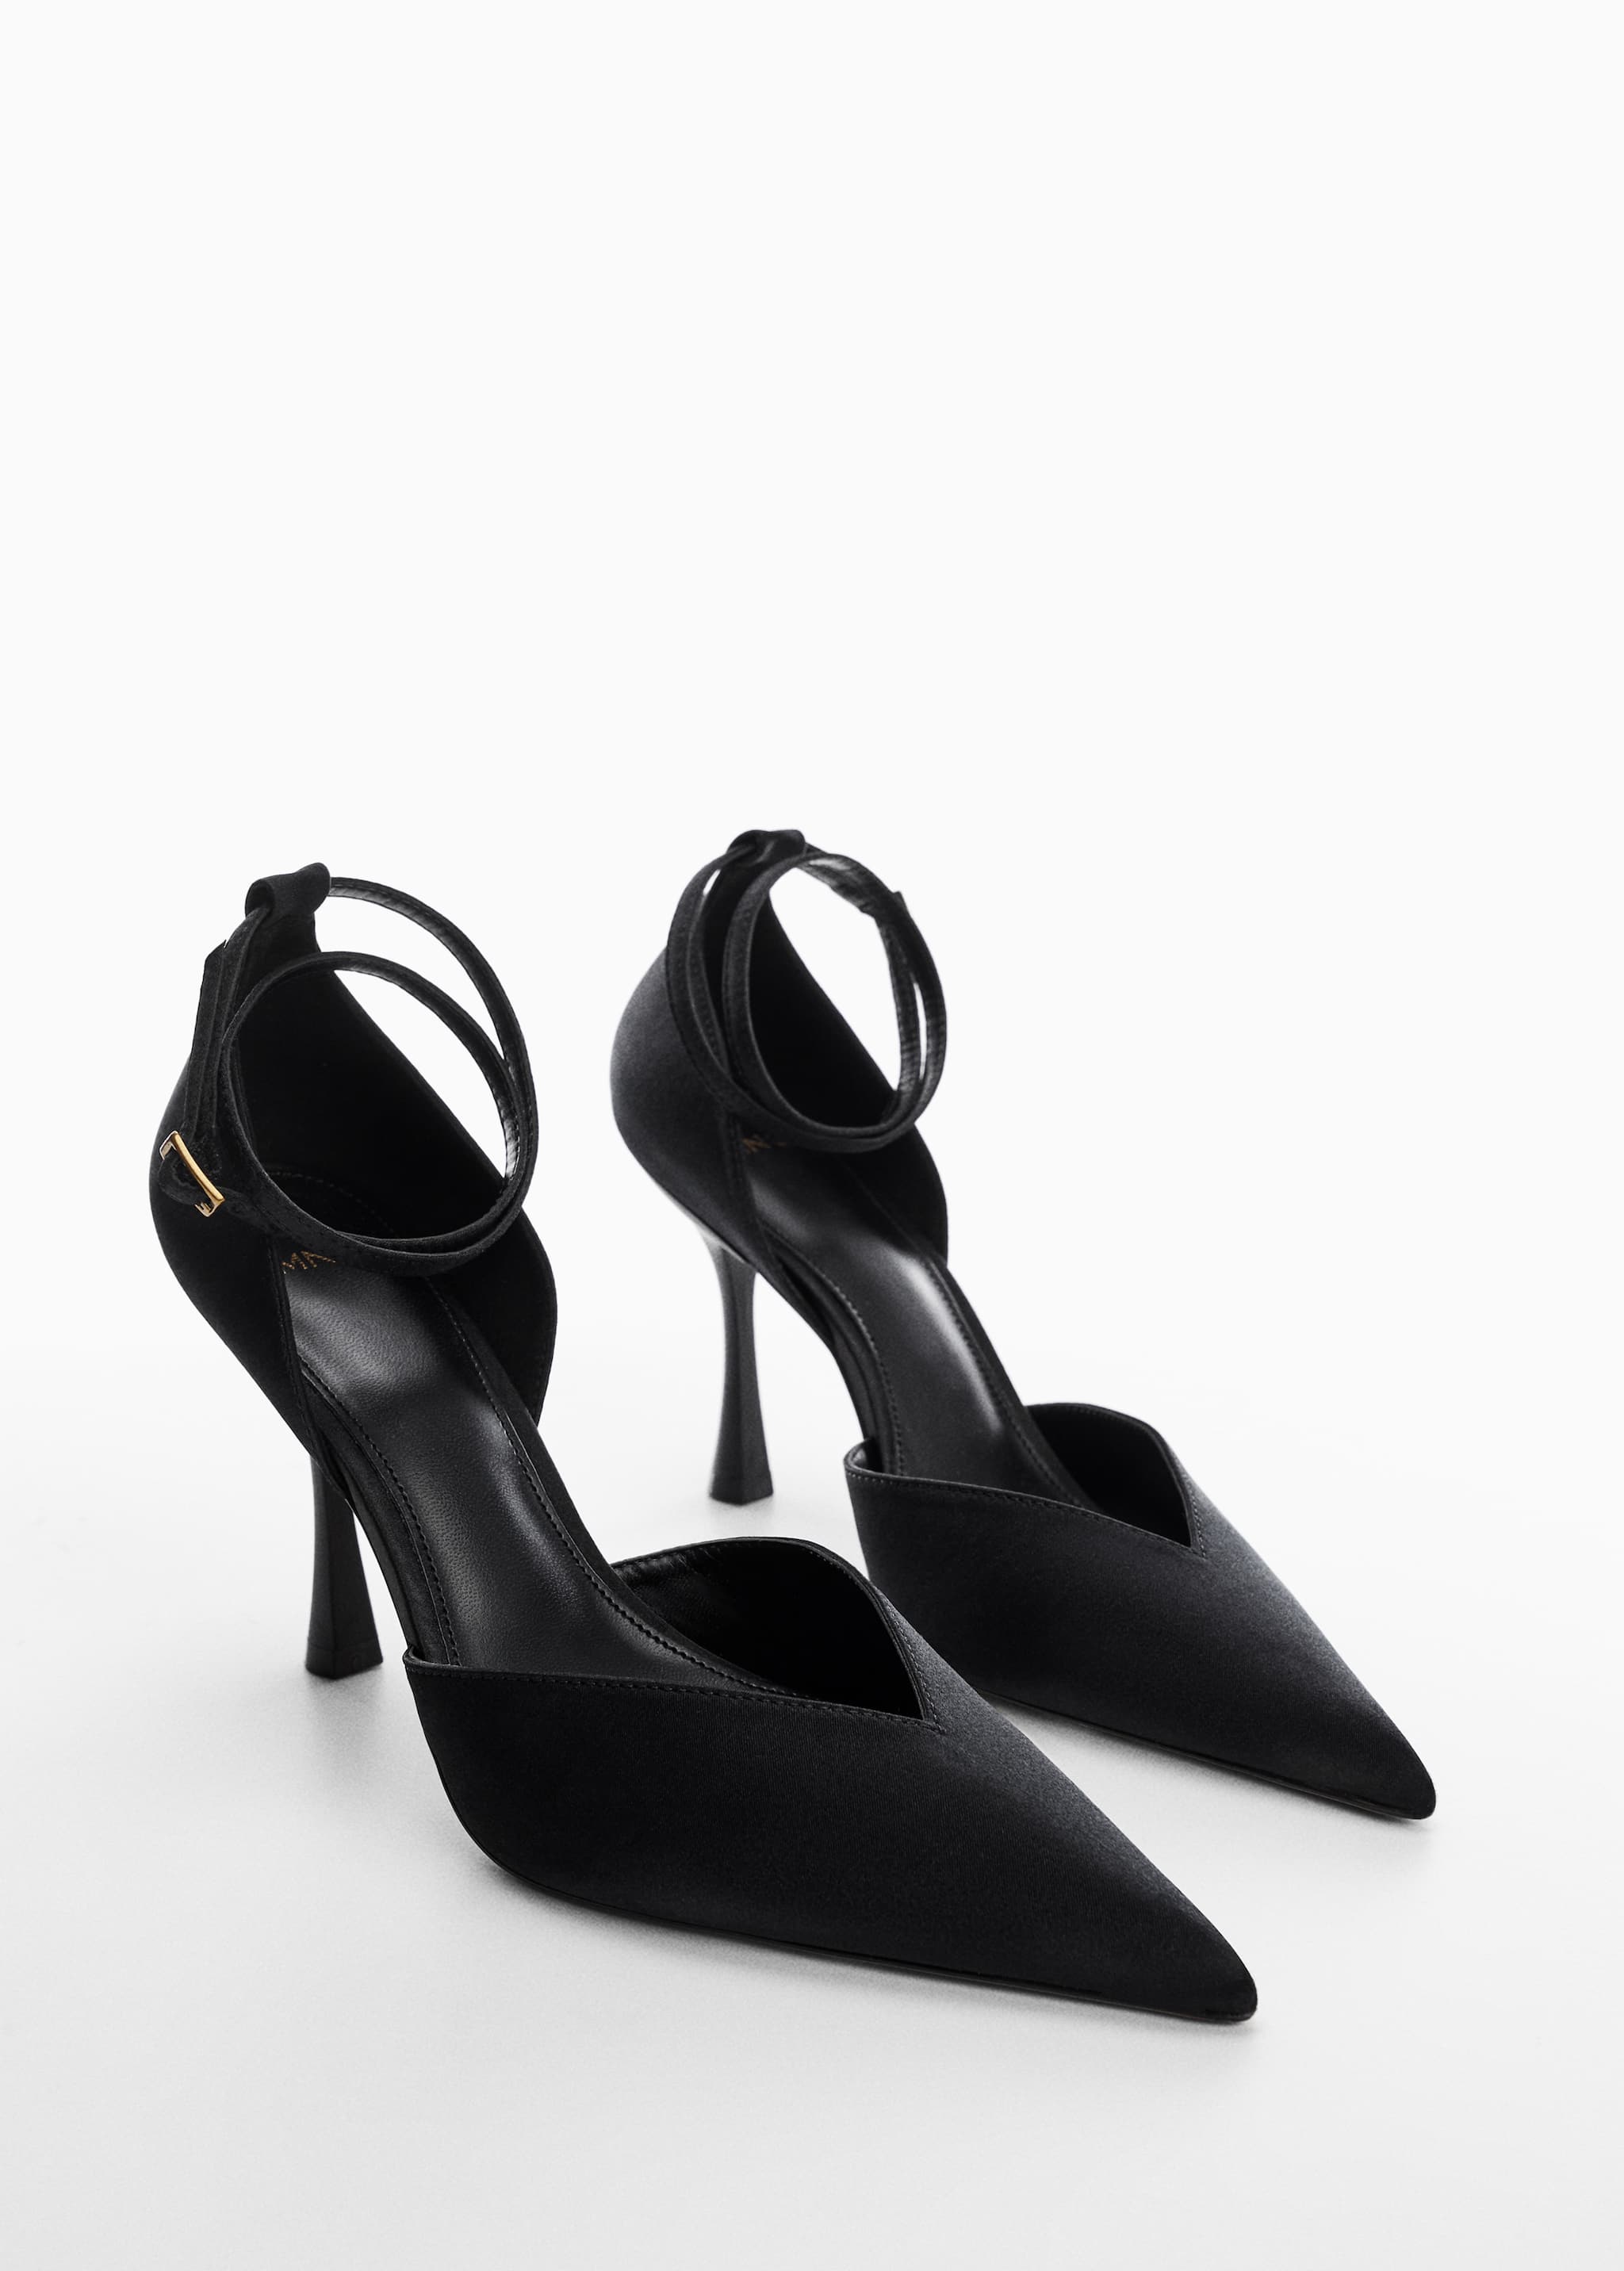 Ankle-cuff pointed toe shoes - Medium plane